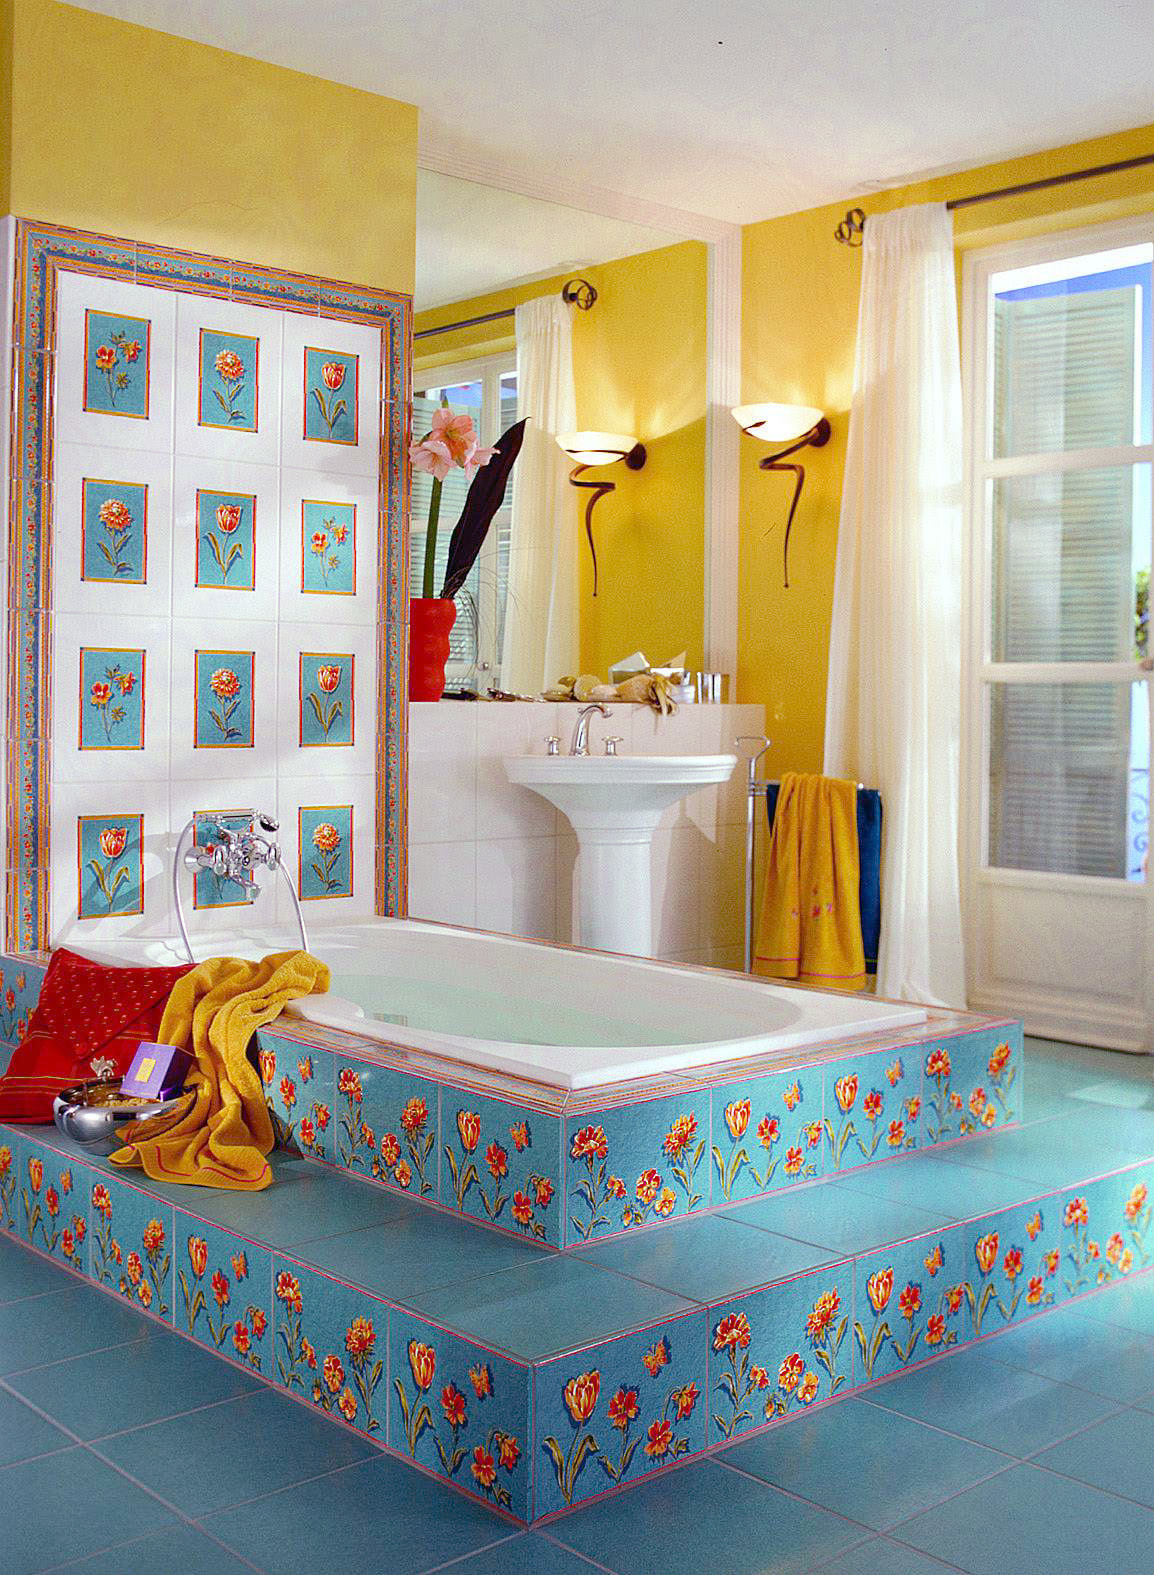 A colourful bathroom with blue yellow and red